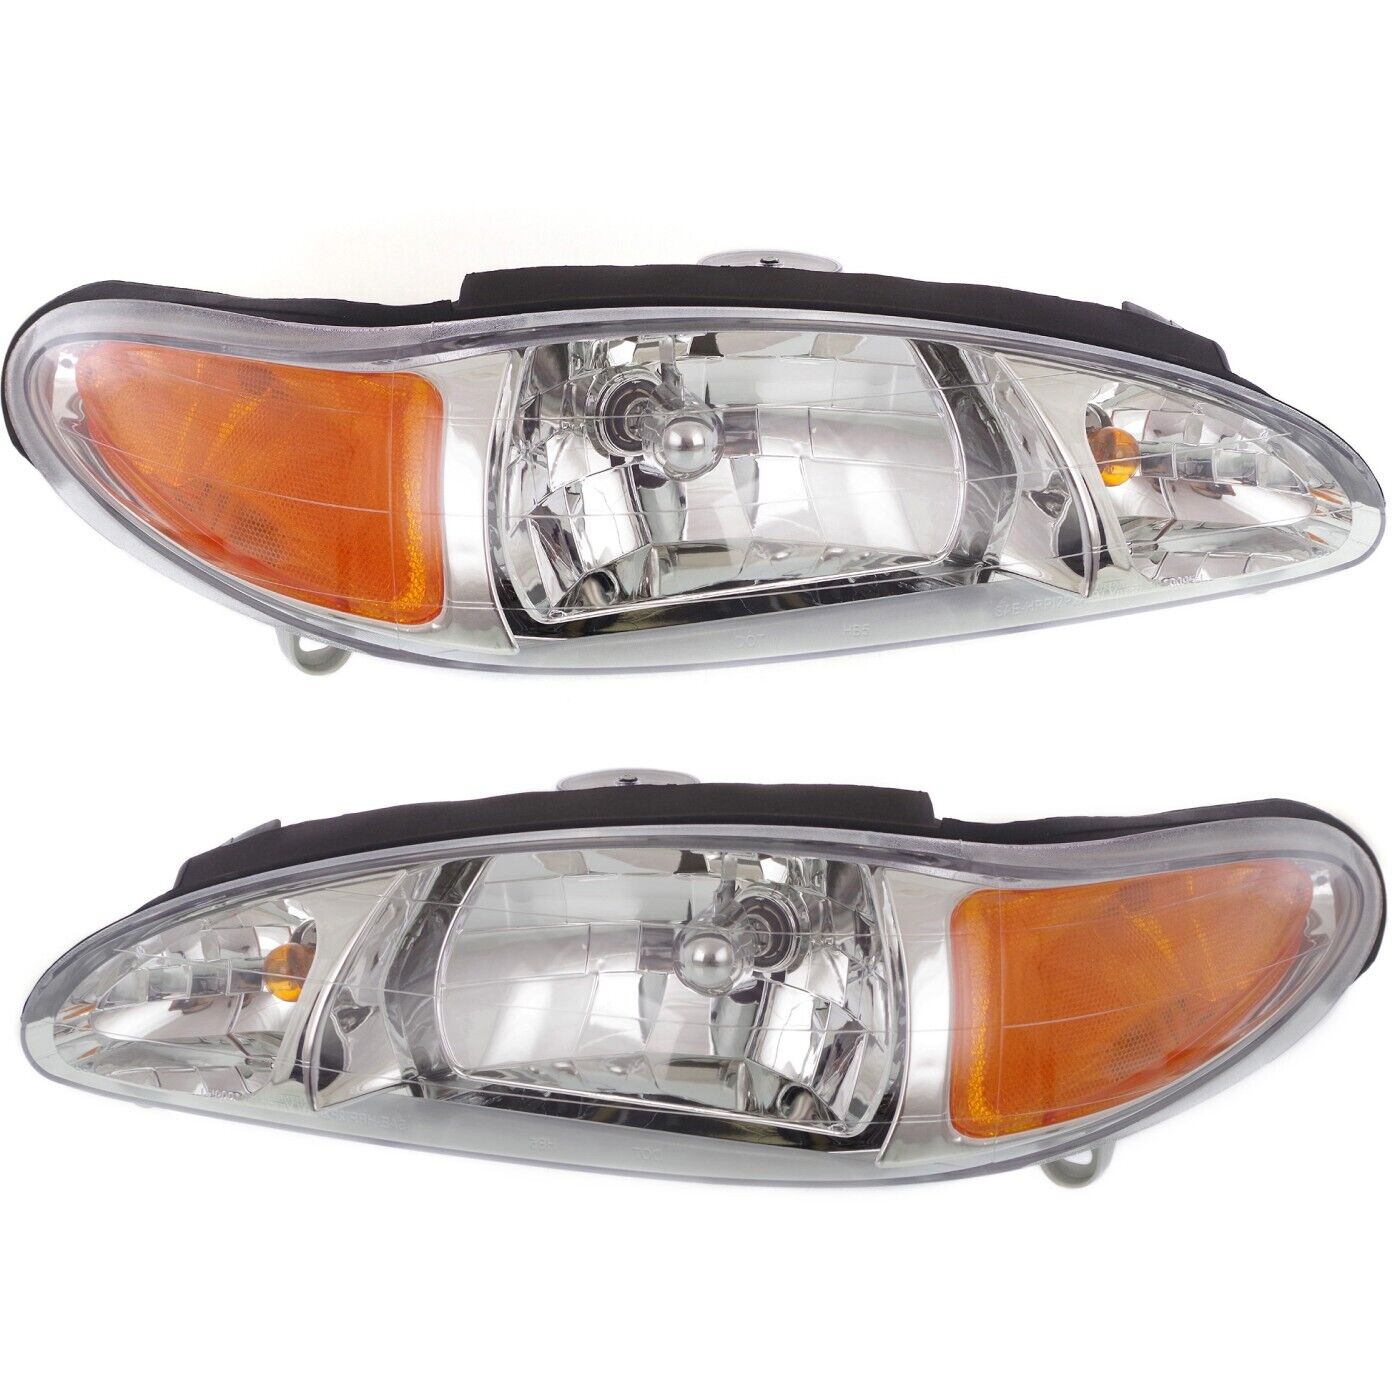 Halogen Headlight Set For 1997-2002 Ford Escort 97-99 Tracer Left and Right Pair